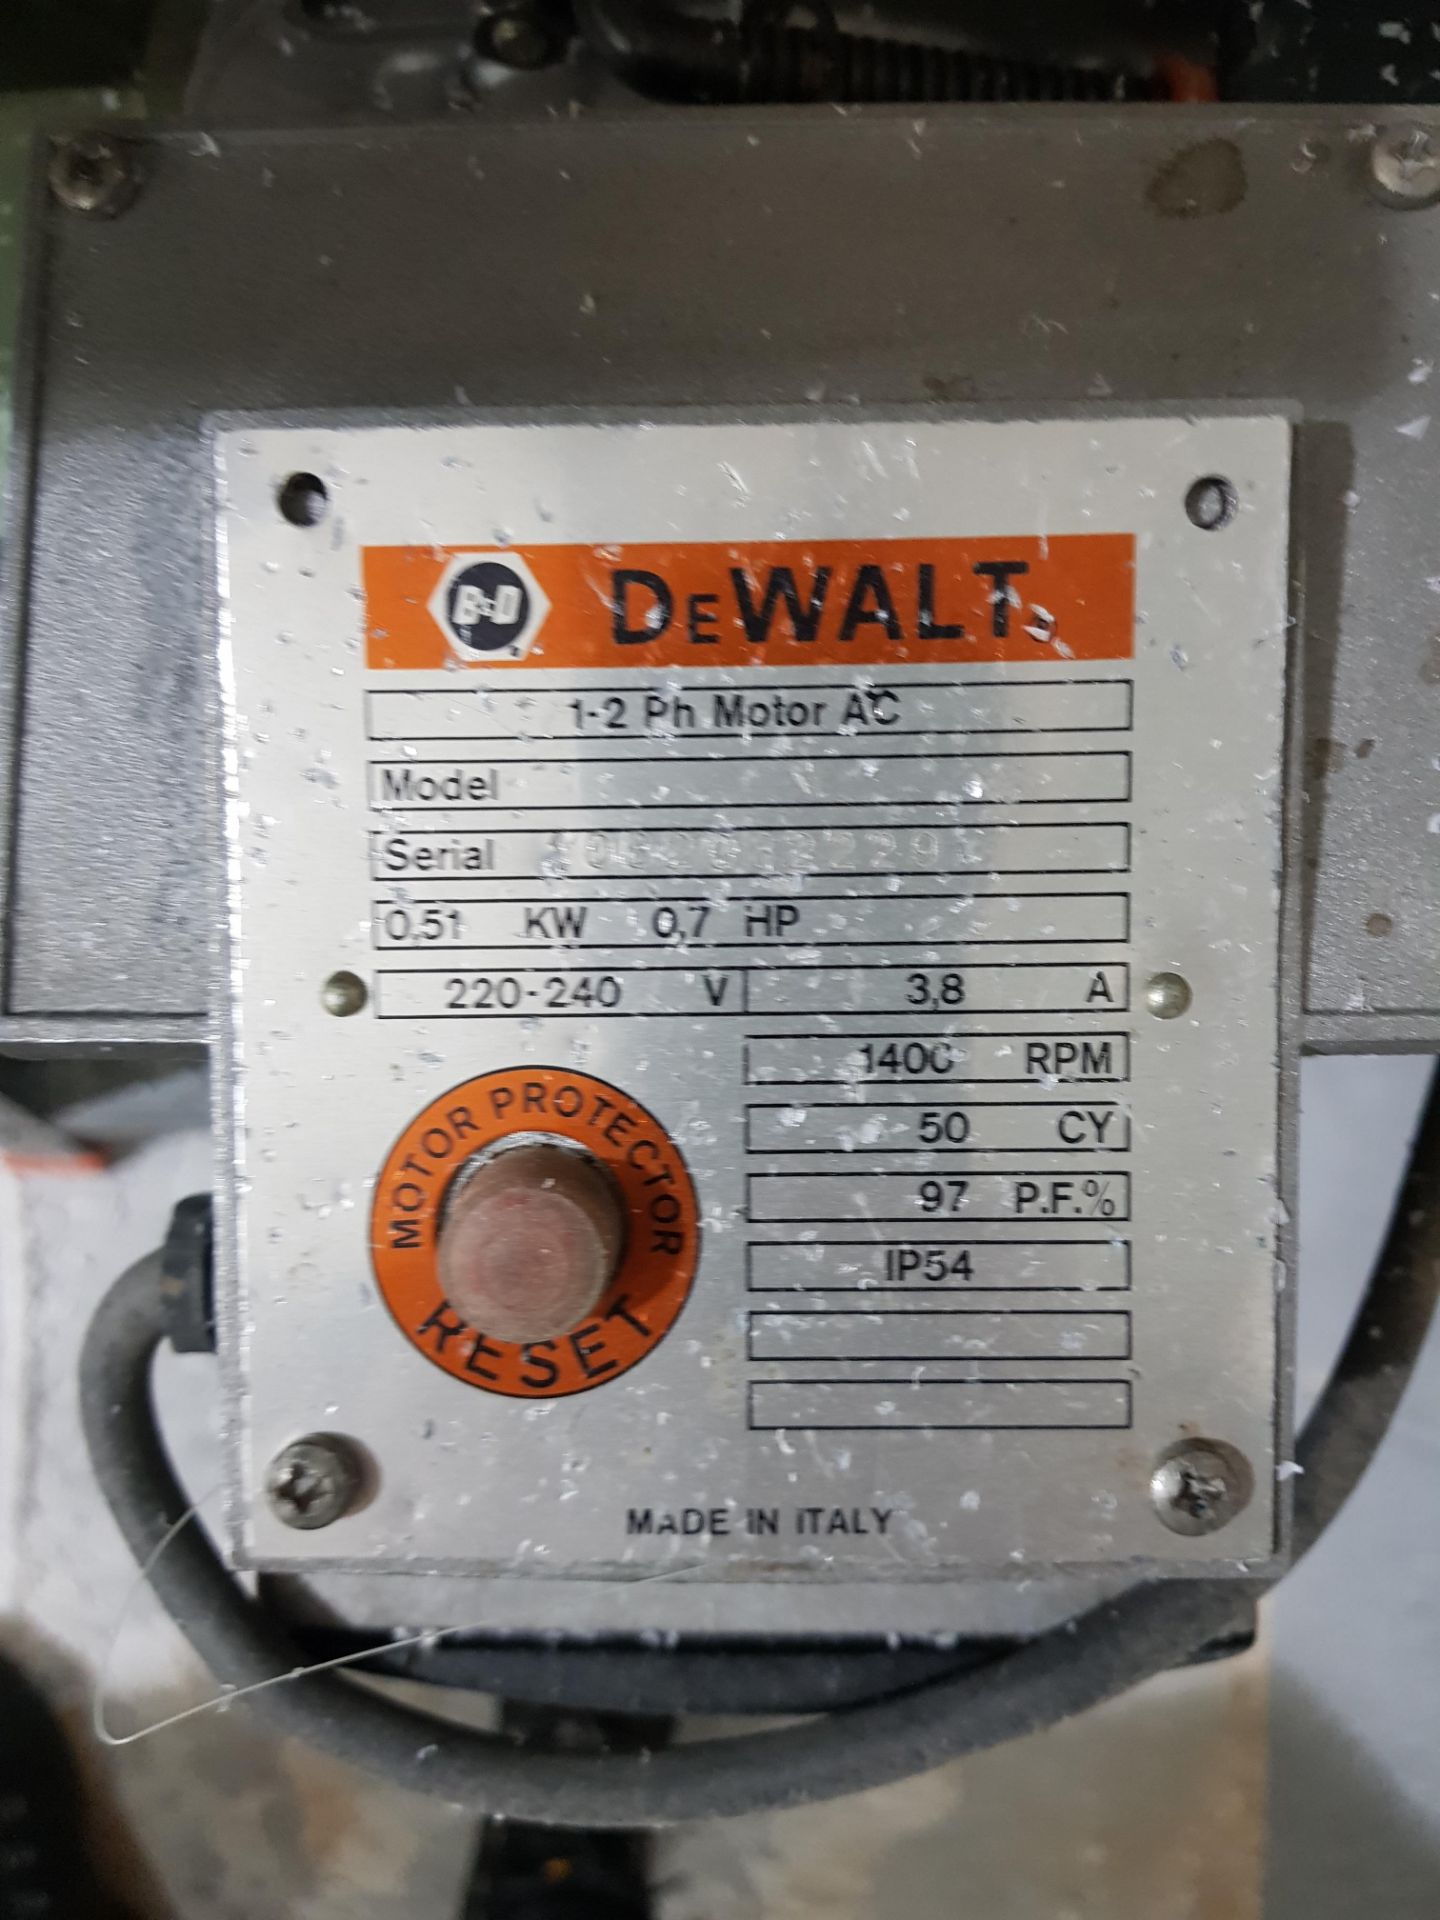 DEWALT BS/1310 PEDESTAL VERTICAL BANDSAW (ASSETS LOCATED IN DENTON, MANCHESTER. VIEWING STRICTLY - Image 4 of 4